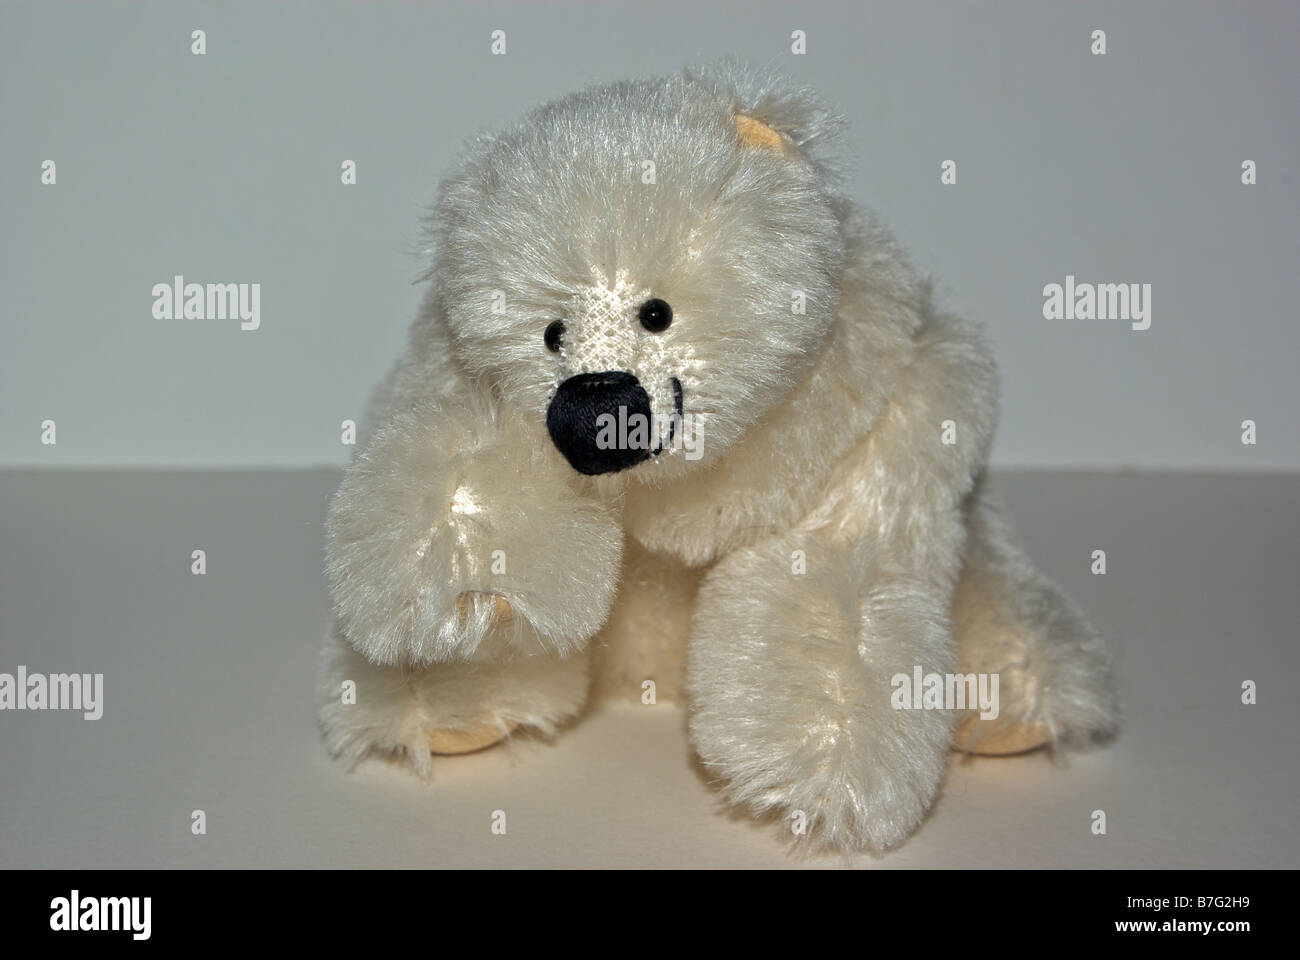 Hand crafted stuffed articulated plush toy polar bear Stock Photo